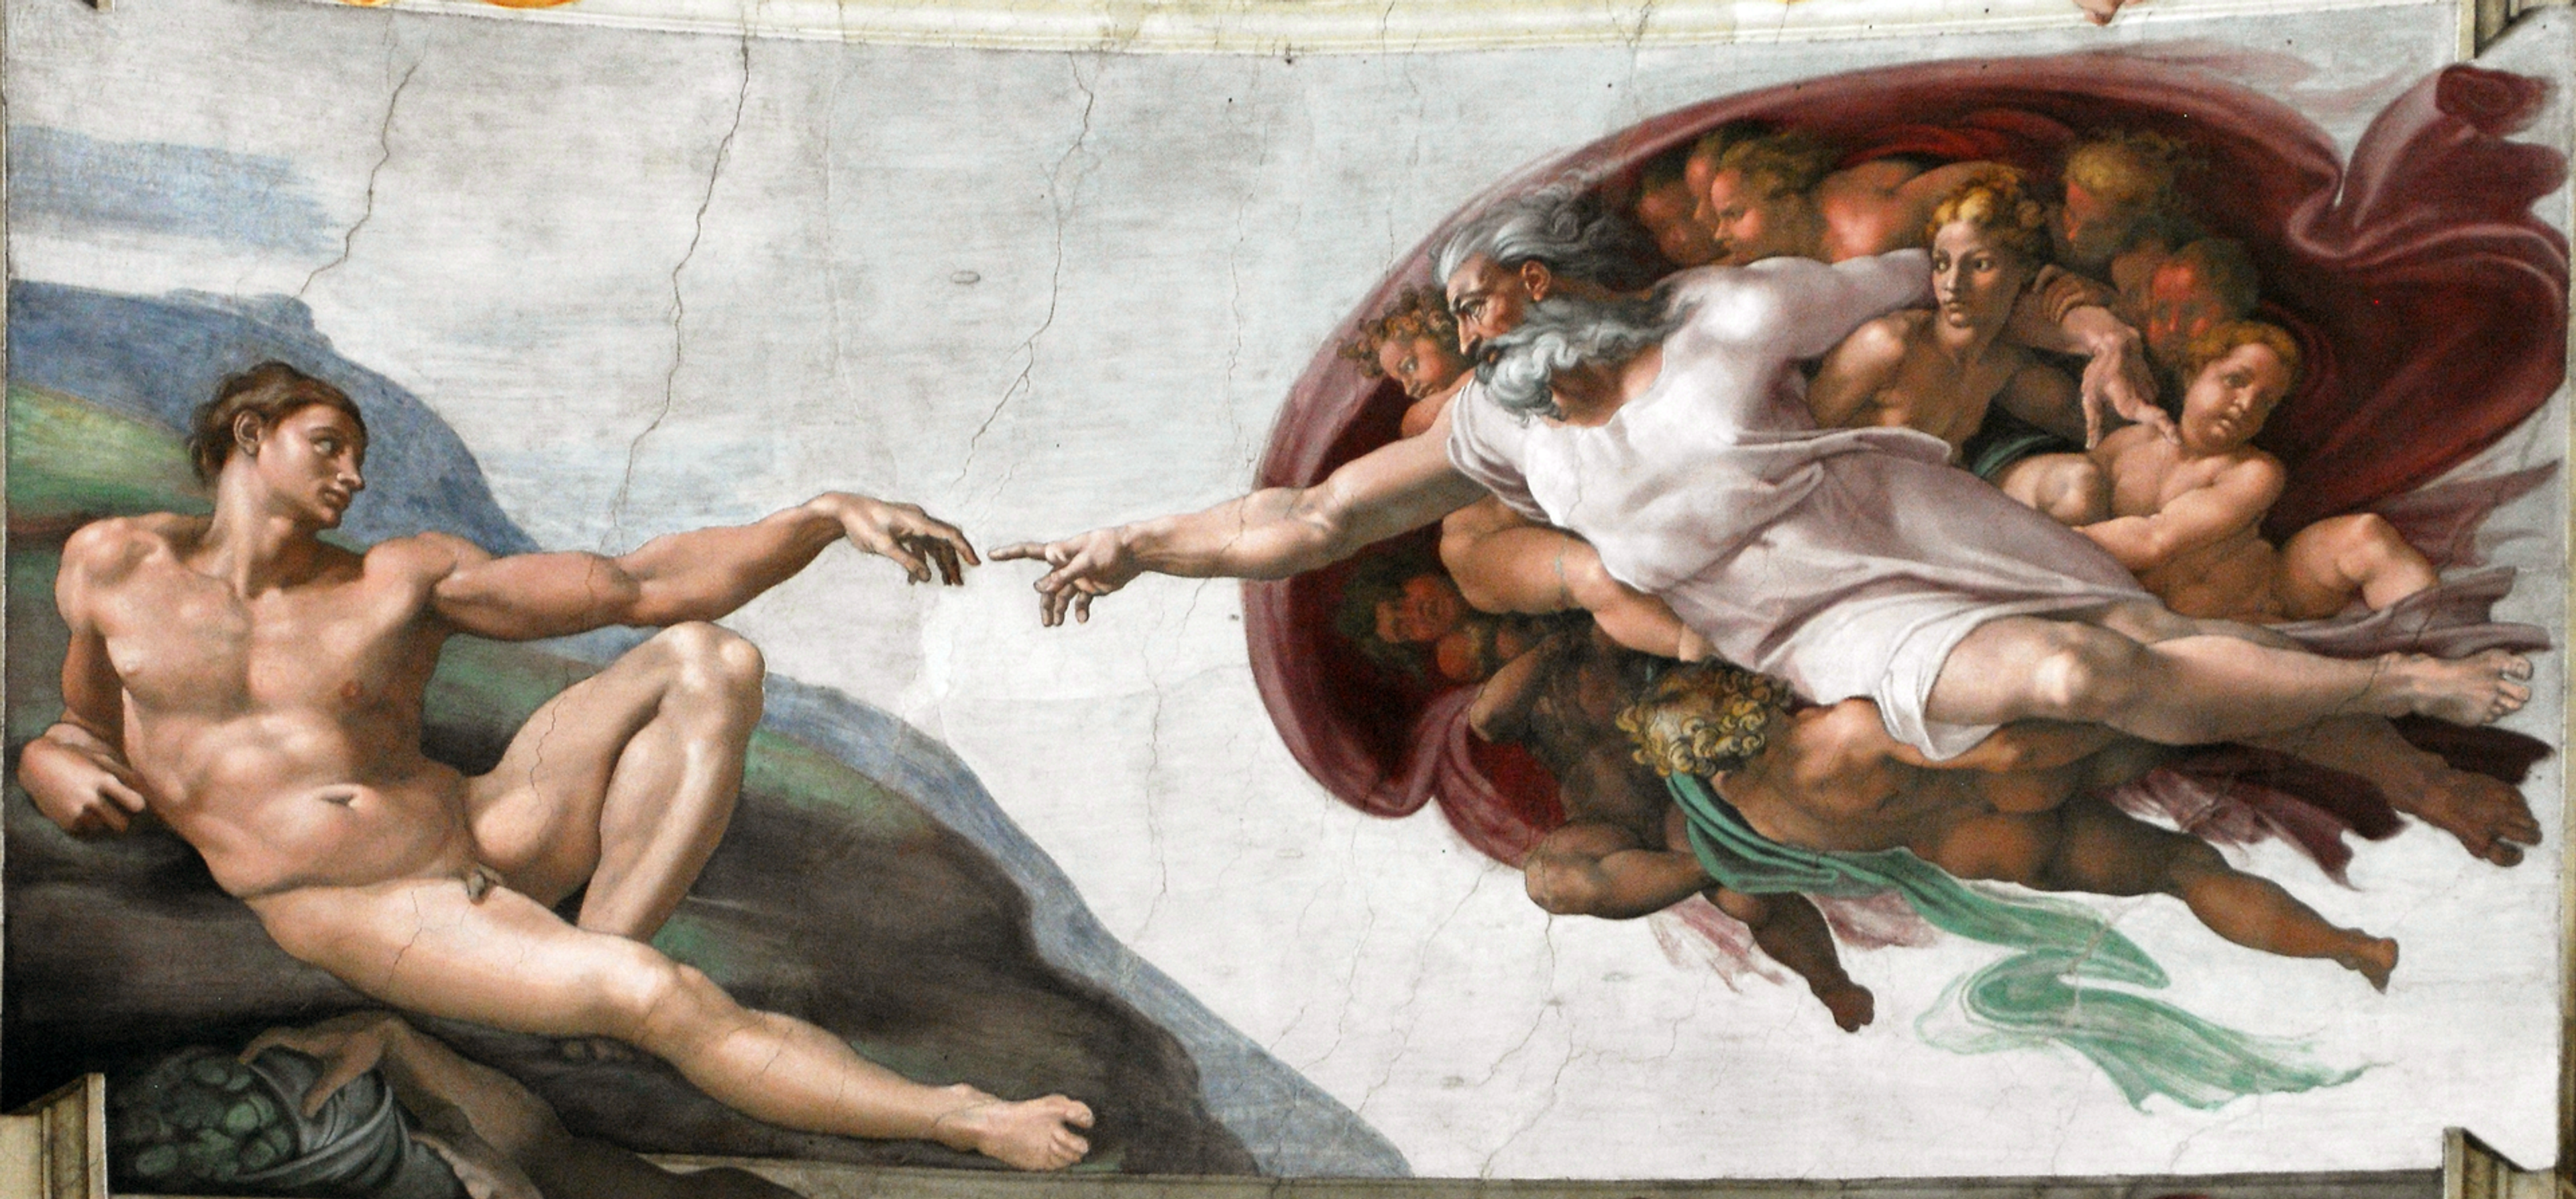 The Creation of Adam by Michelangelo, a panel from the Sistine Chapel Ceiling.